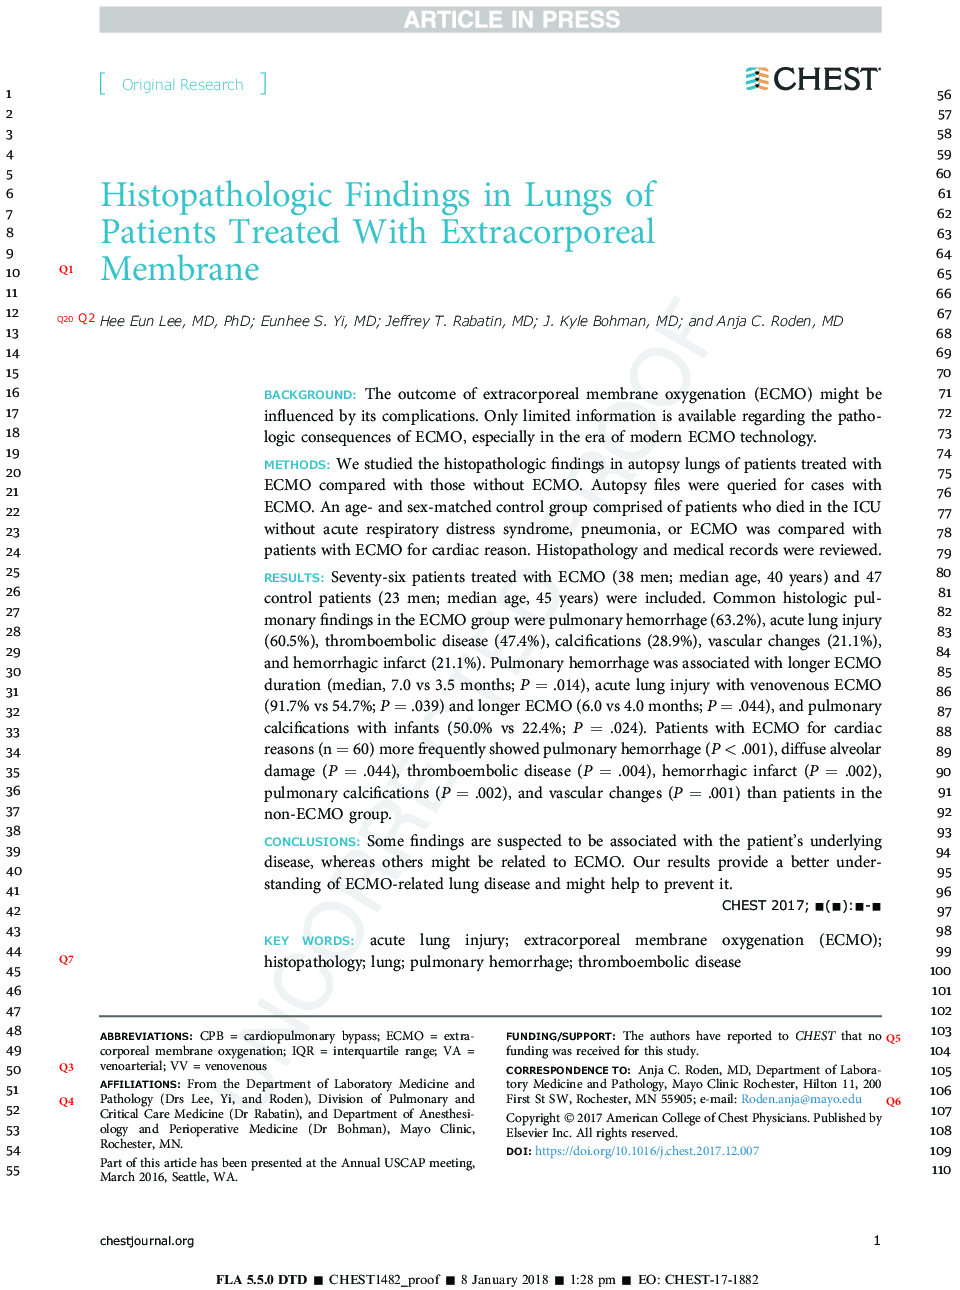 Histopathologic Findings in Lungs of Patients Treated With Extracorporeal Membrane Oxygenation